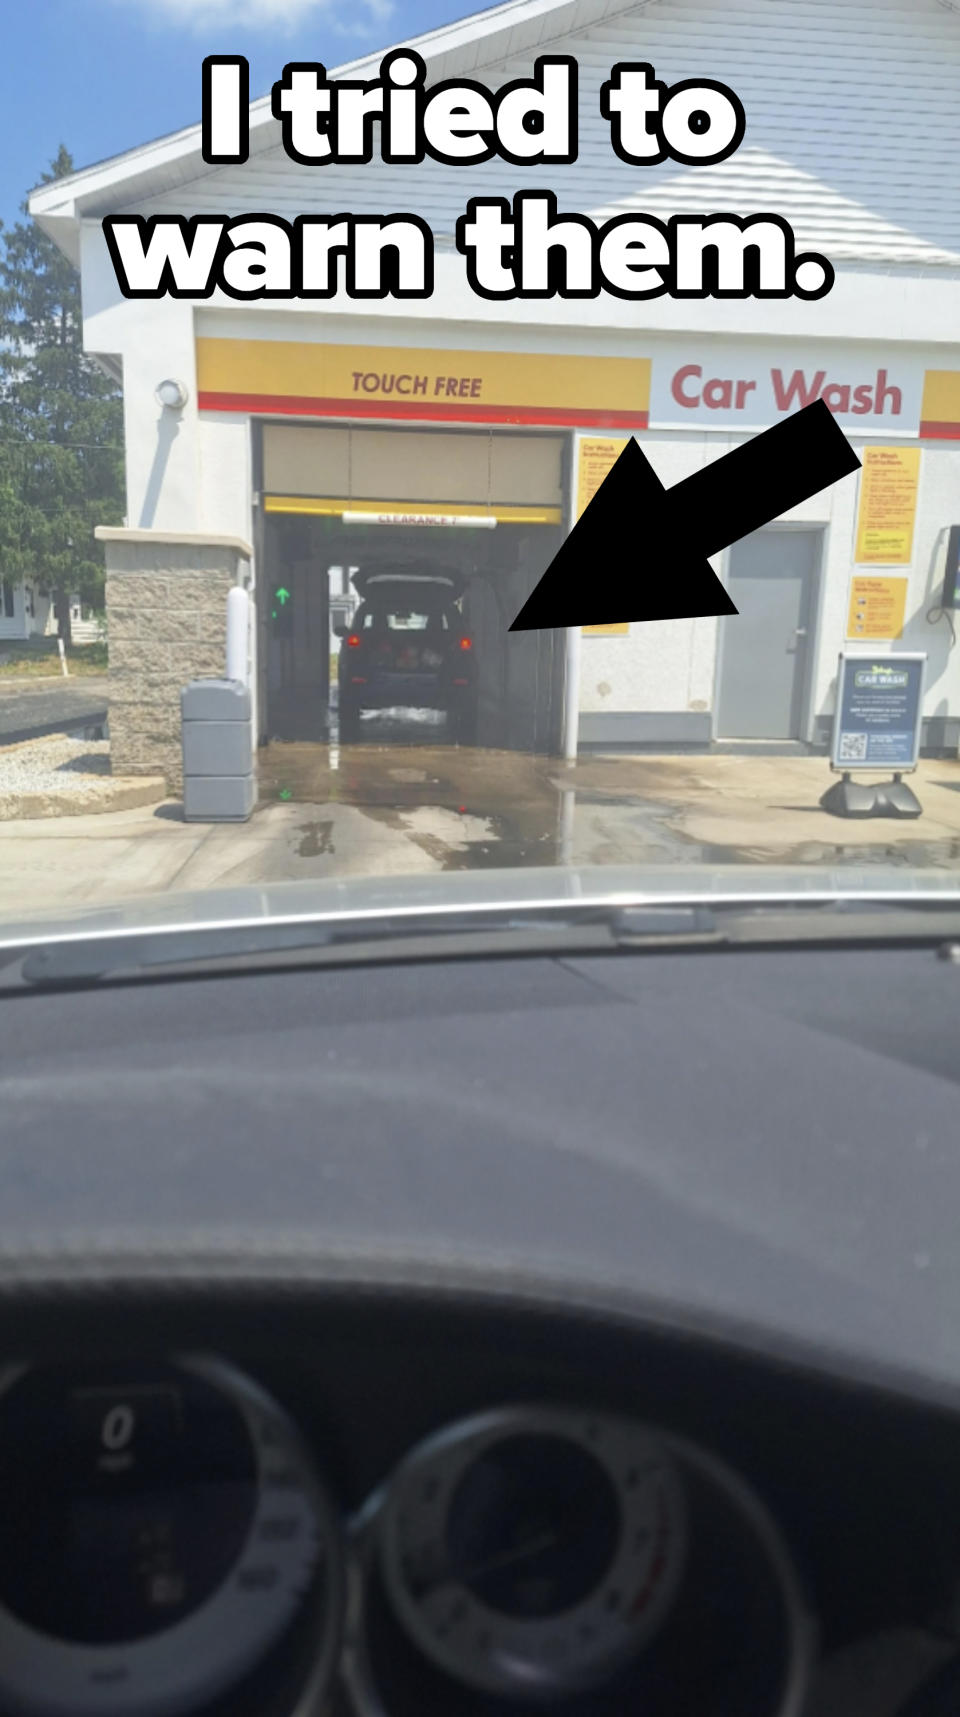 View of a car entering a touch-free car wash as seen from the inside of another car. Various instructions and signs are visible around the car wash entrance